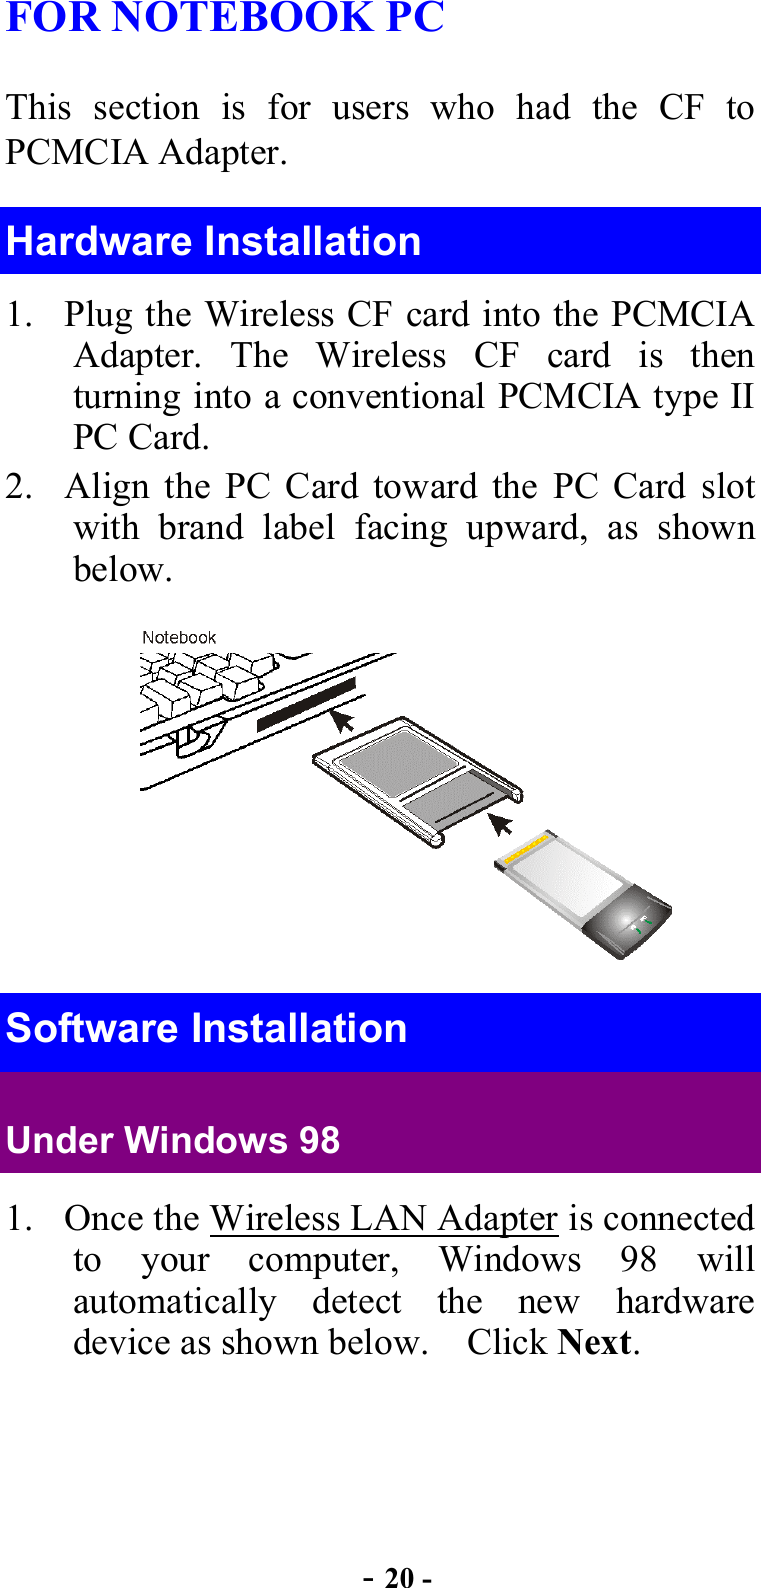  - 20 - FOR NOTEBOOK PC   This section is for users who had the CF to PCMCIA Adapter. Hardware Installation 1.  Plug the Wireless CF card into the PCMCIA Adapter. The Wireless CF card is then turning into a conventional PCMCIA type II PC Card.   2.  Align the PC Card toward the PC Card slot with brand label facing upward, as shown below. Software Installation Under Windows 98 1.  Once the Wireless LAN Adapter is connected to your computer, Windows 98 will automatically detect the new hardware device as shown below.    Click Next. 